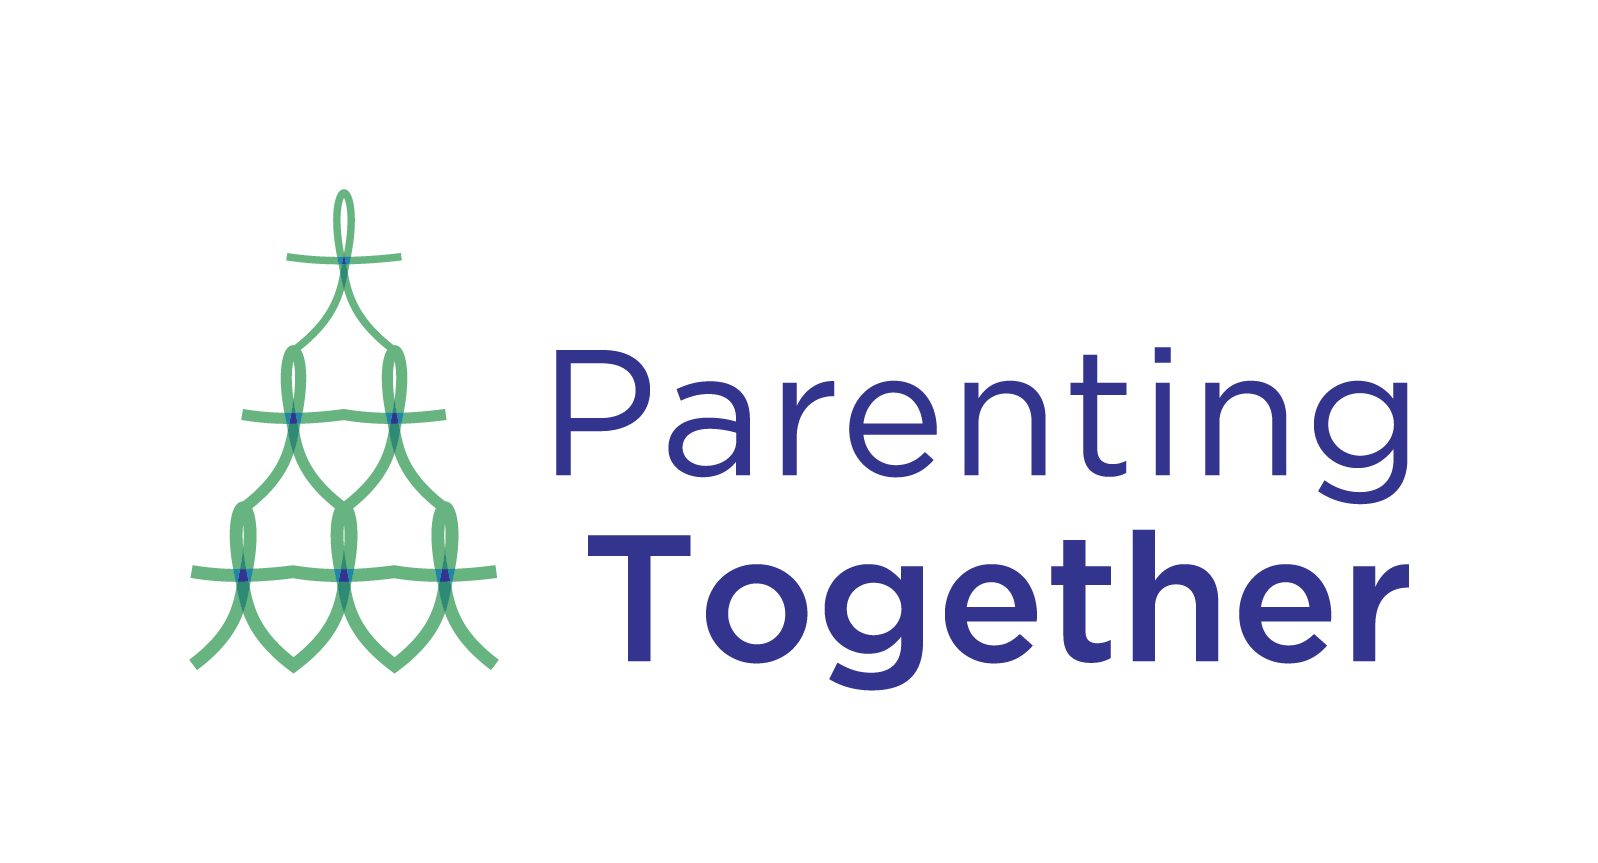 Parenting Together charity